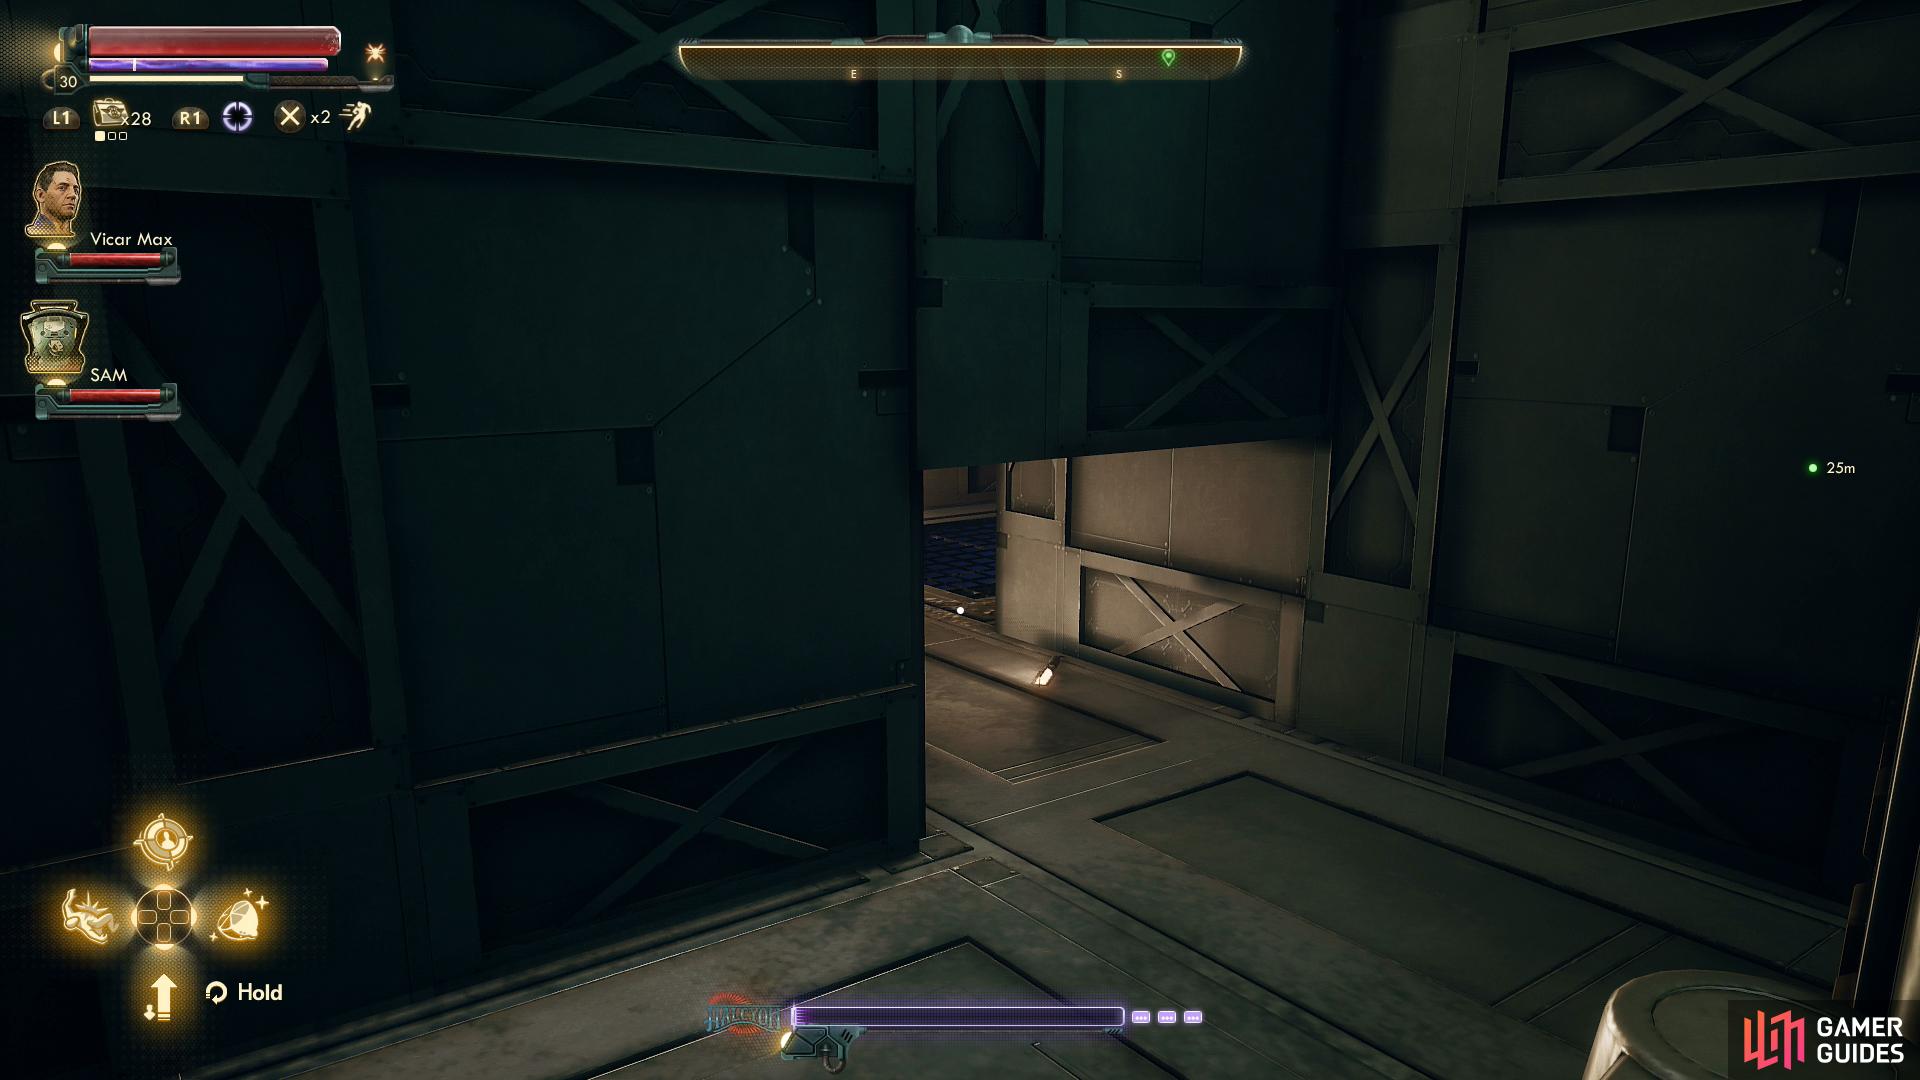 You can find a passage leading to a small office adjacent to the cargo room.